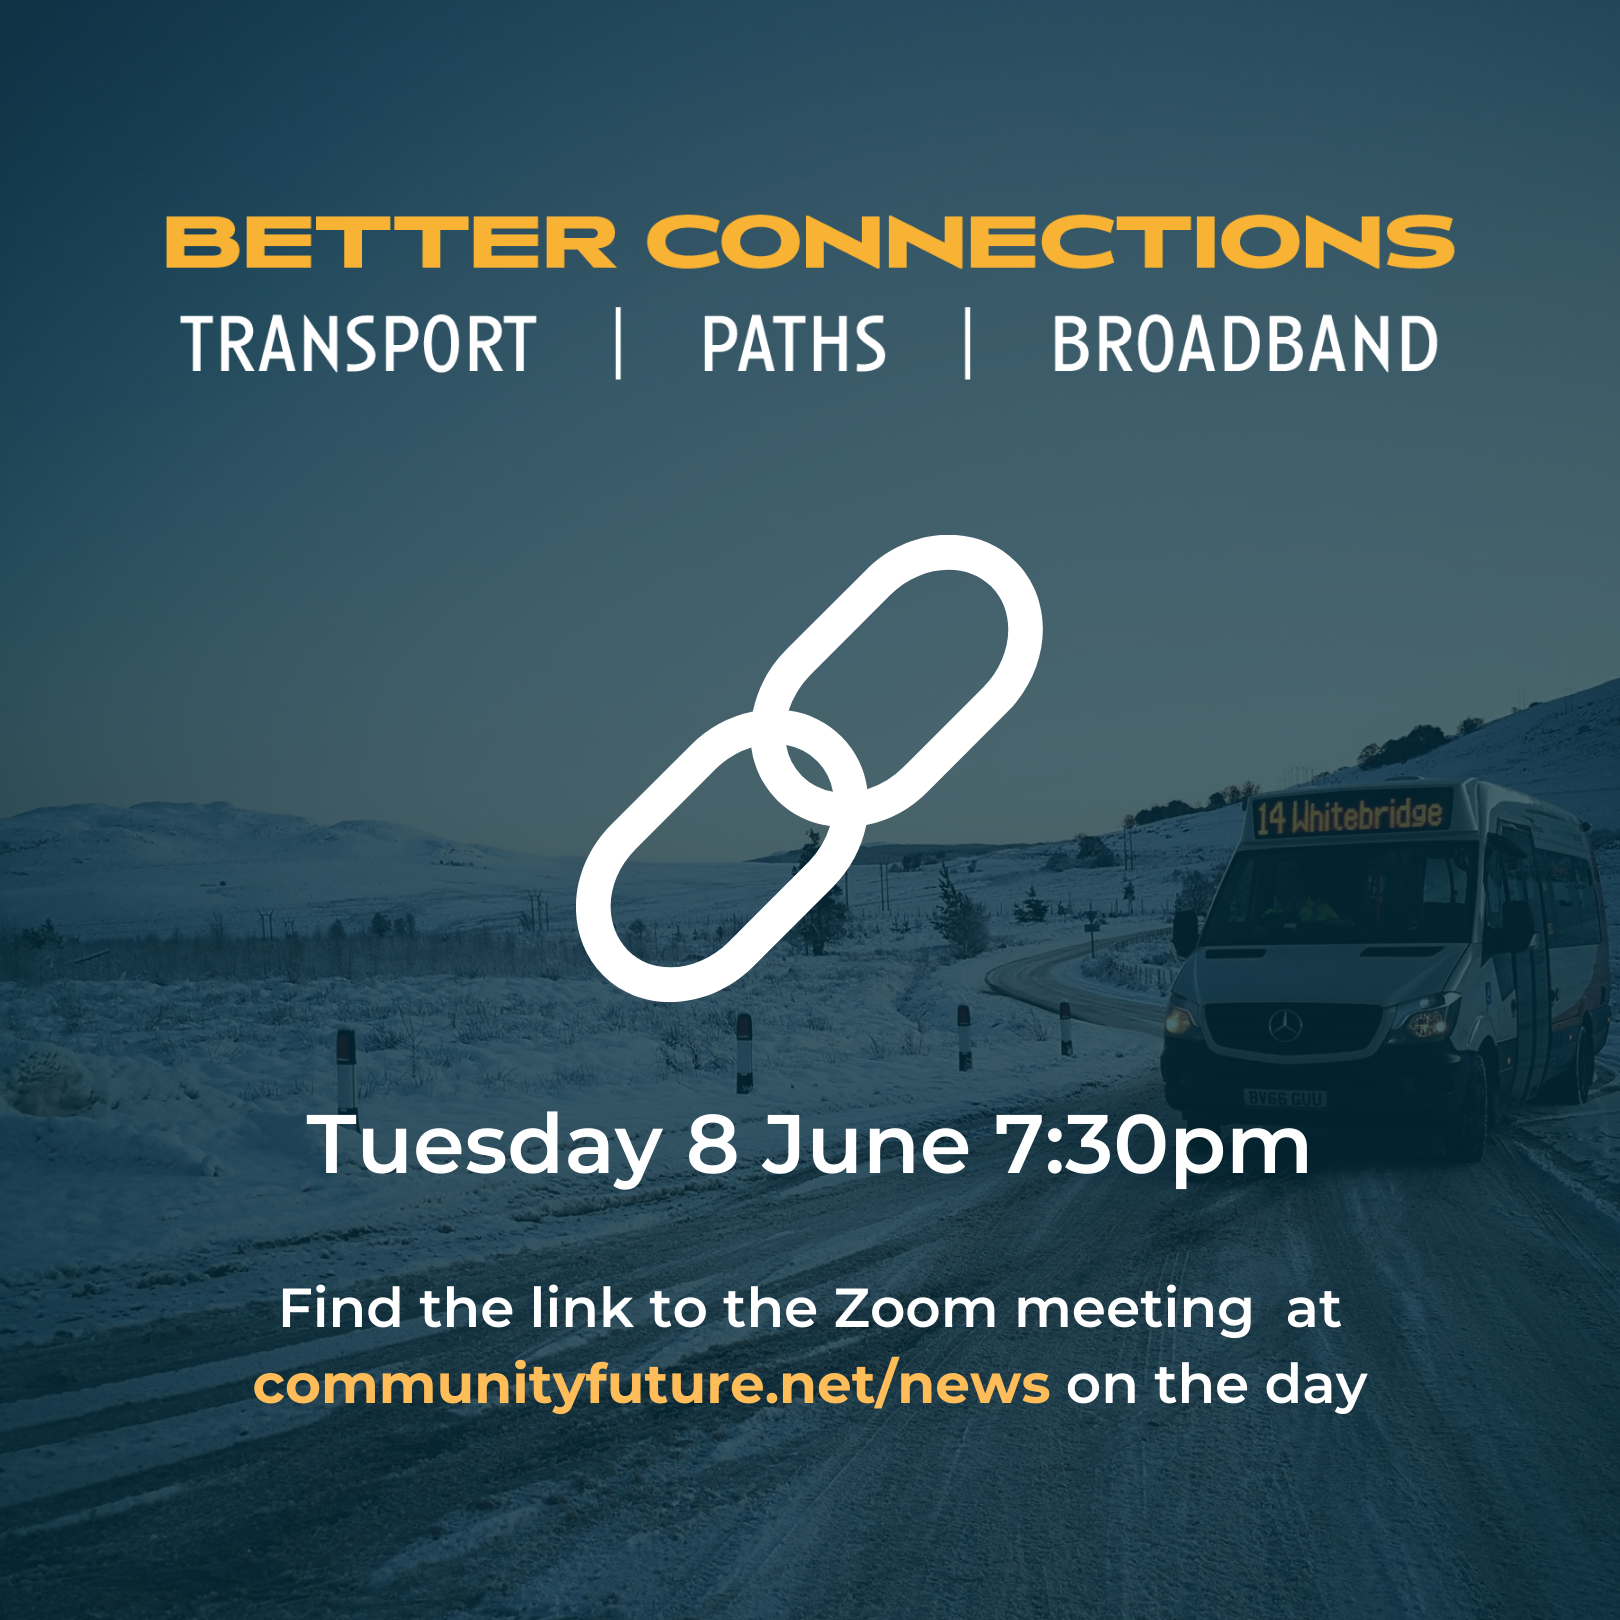 Zoom joining details for better connections workshop tuesday 8 june 7:30pm